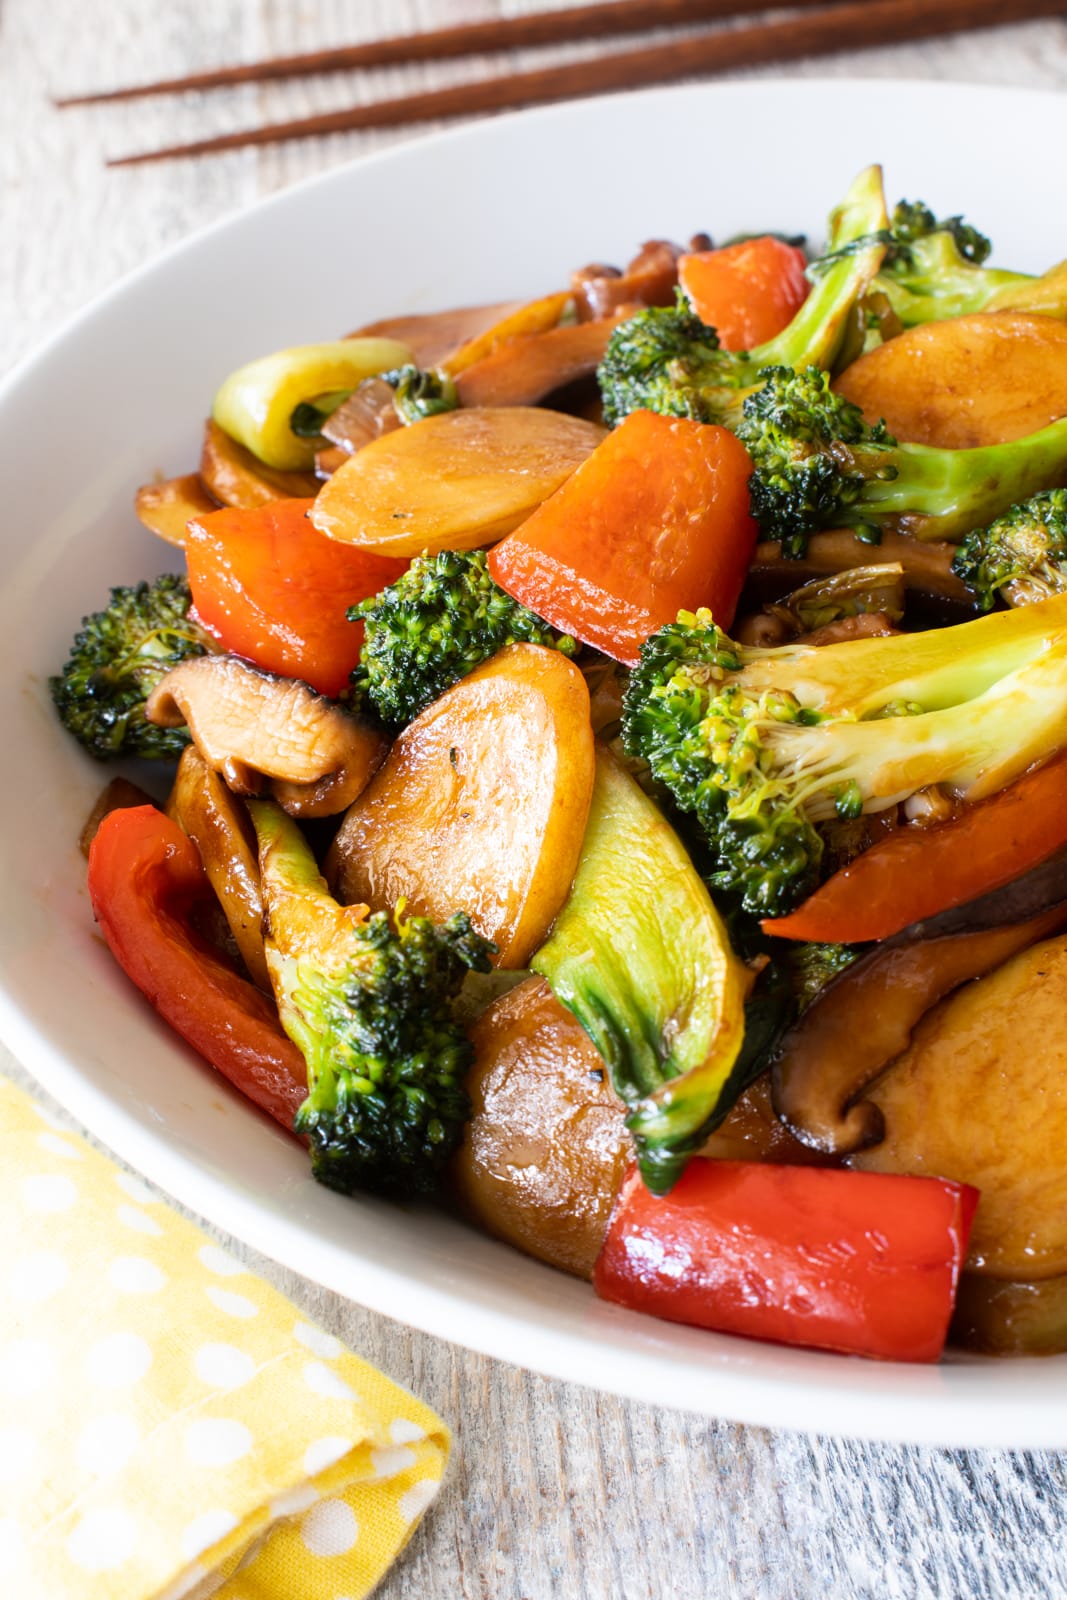 Stir Fried Vegetables and Rice Cakes